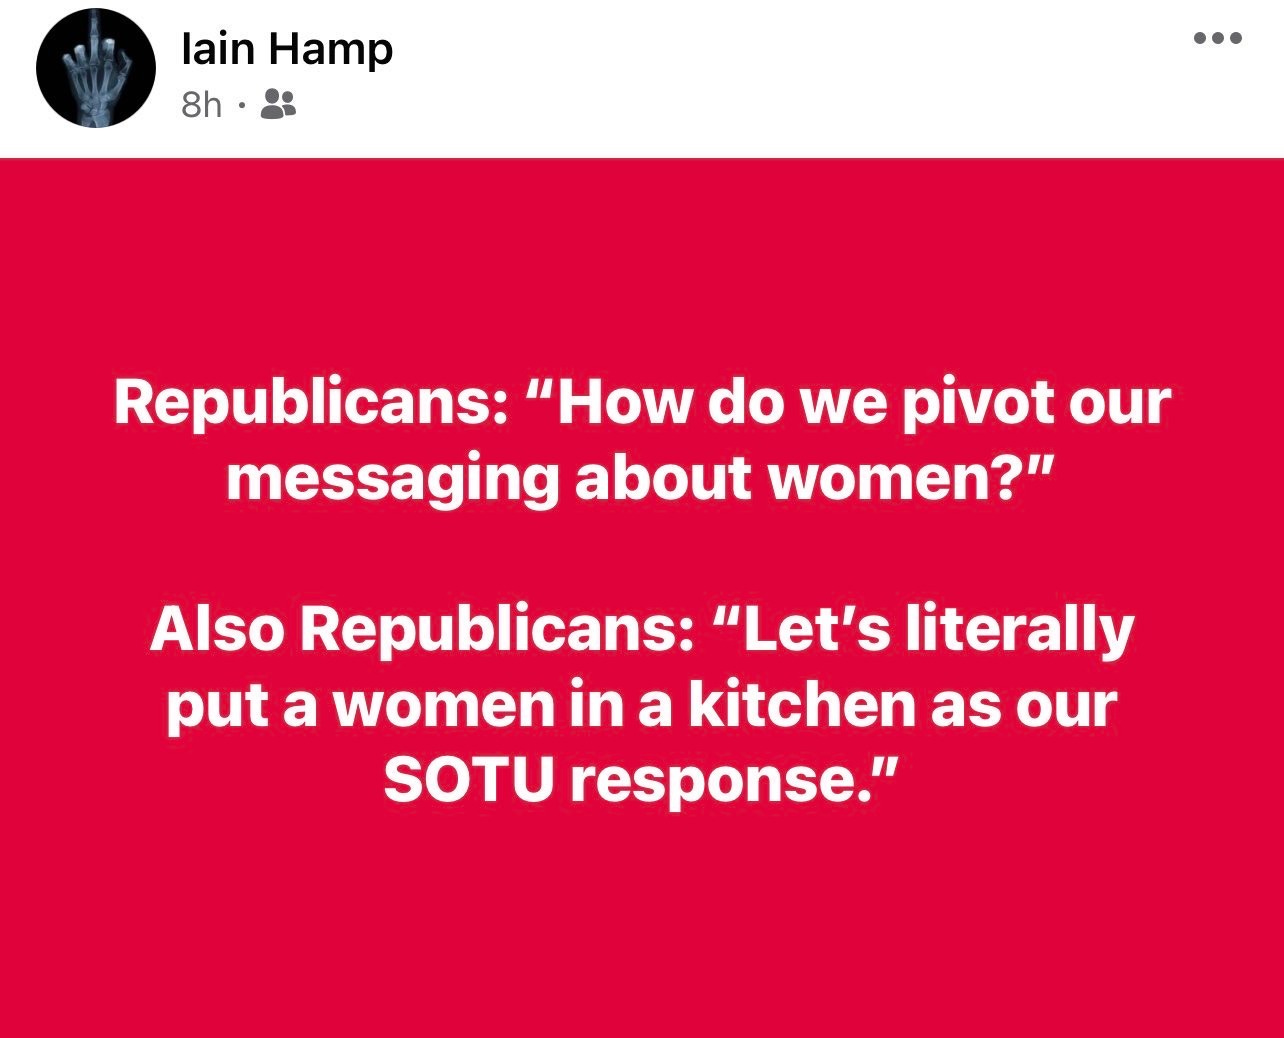 Tweet from Iain Hamp about putting a GOP woman in a kitchen for the SOTU response in 2024